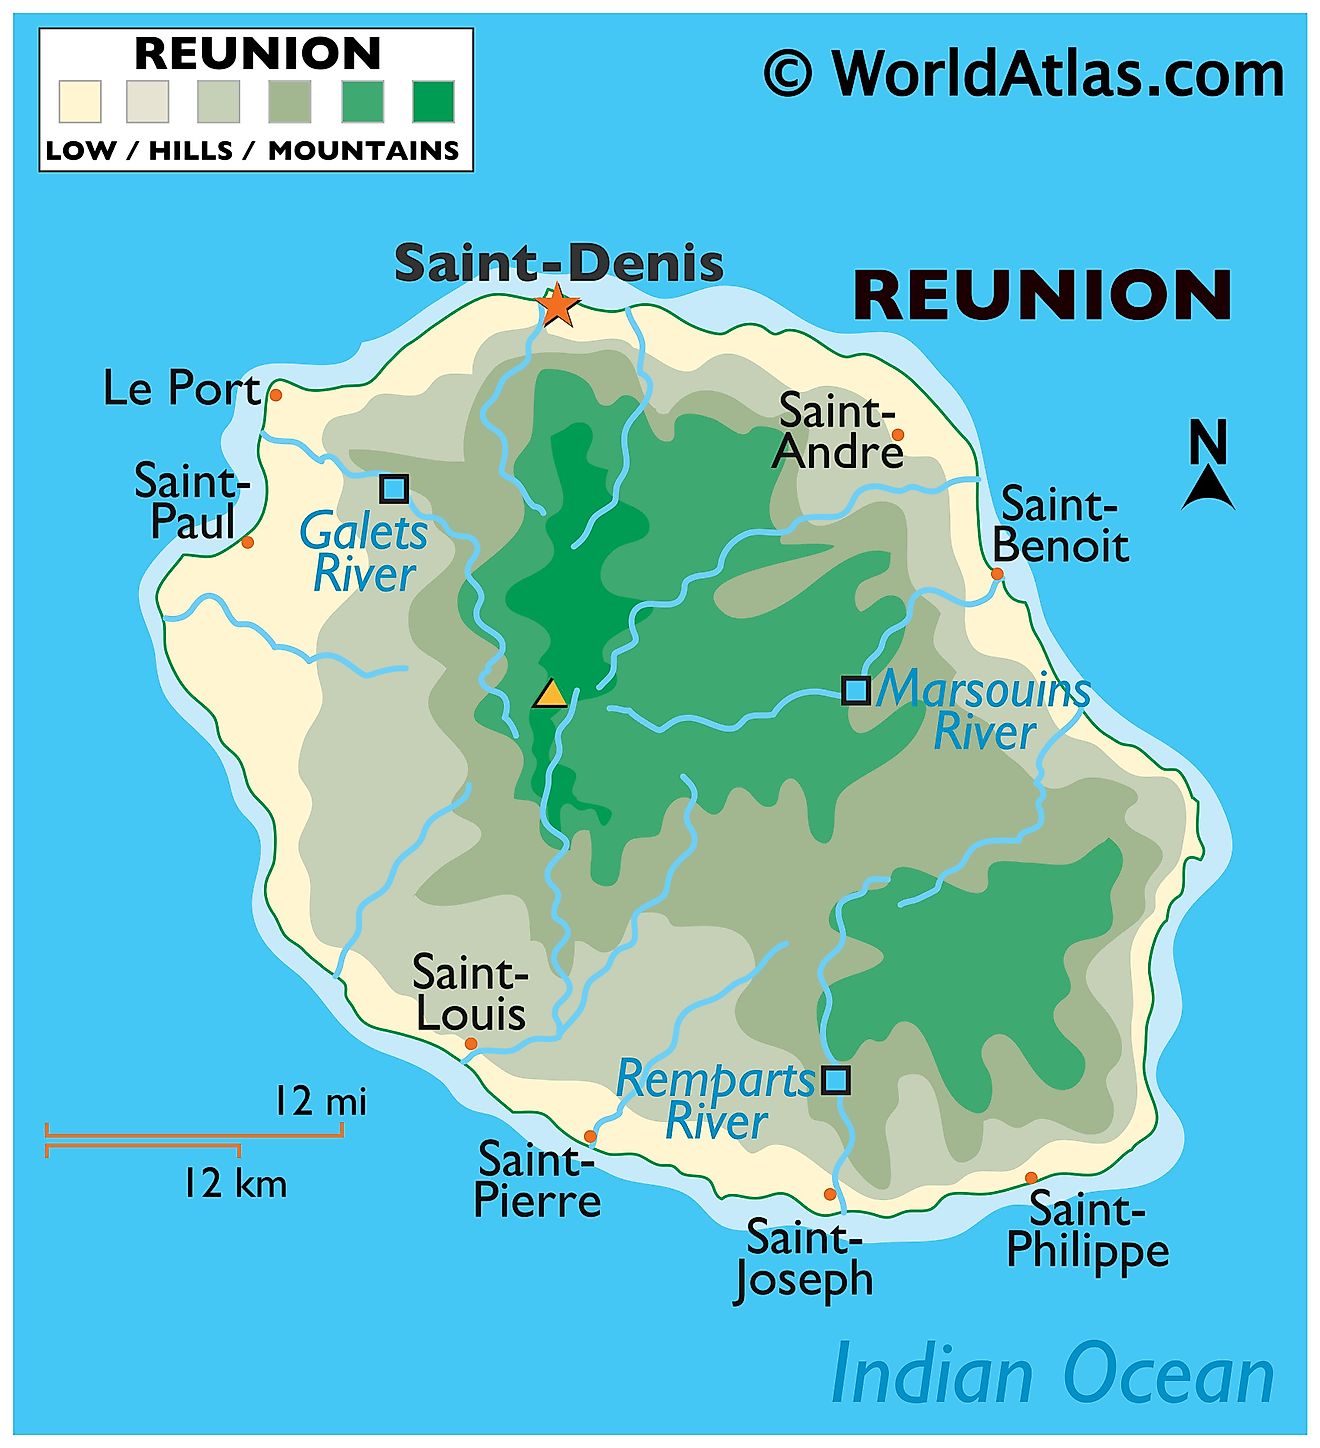 Physical Map of Reunion. It shows the physical features of Reunion Island, its volcanoes and major rivers. 